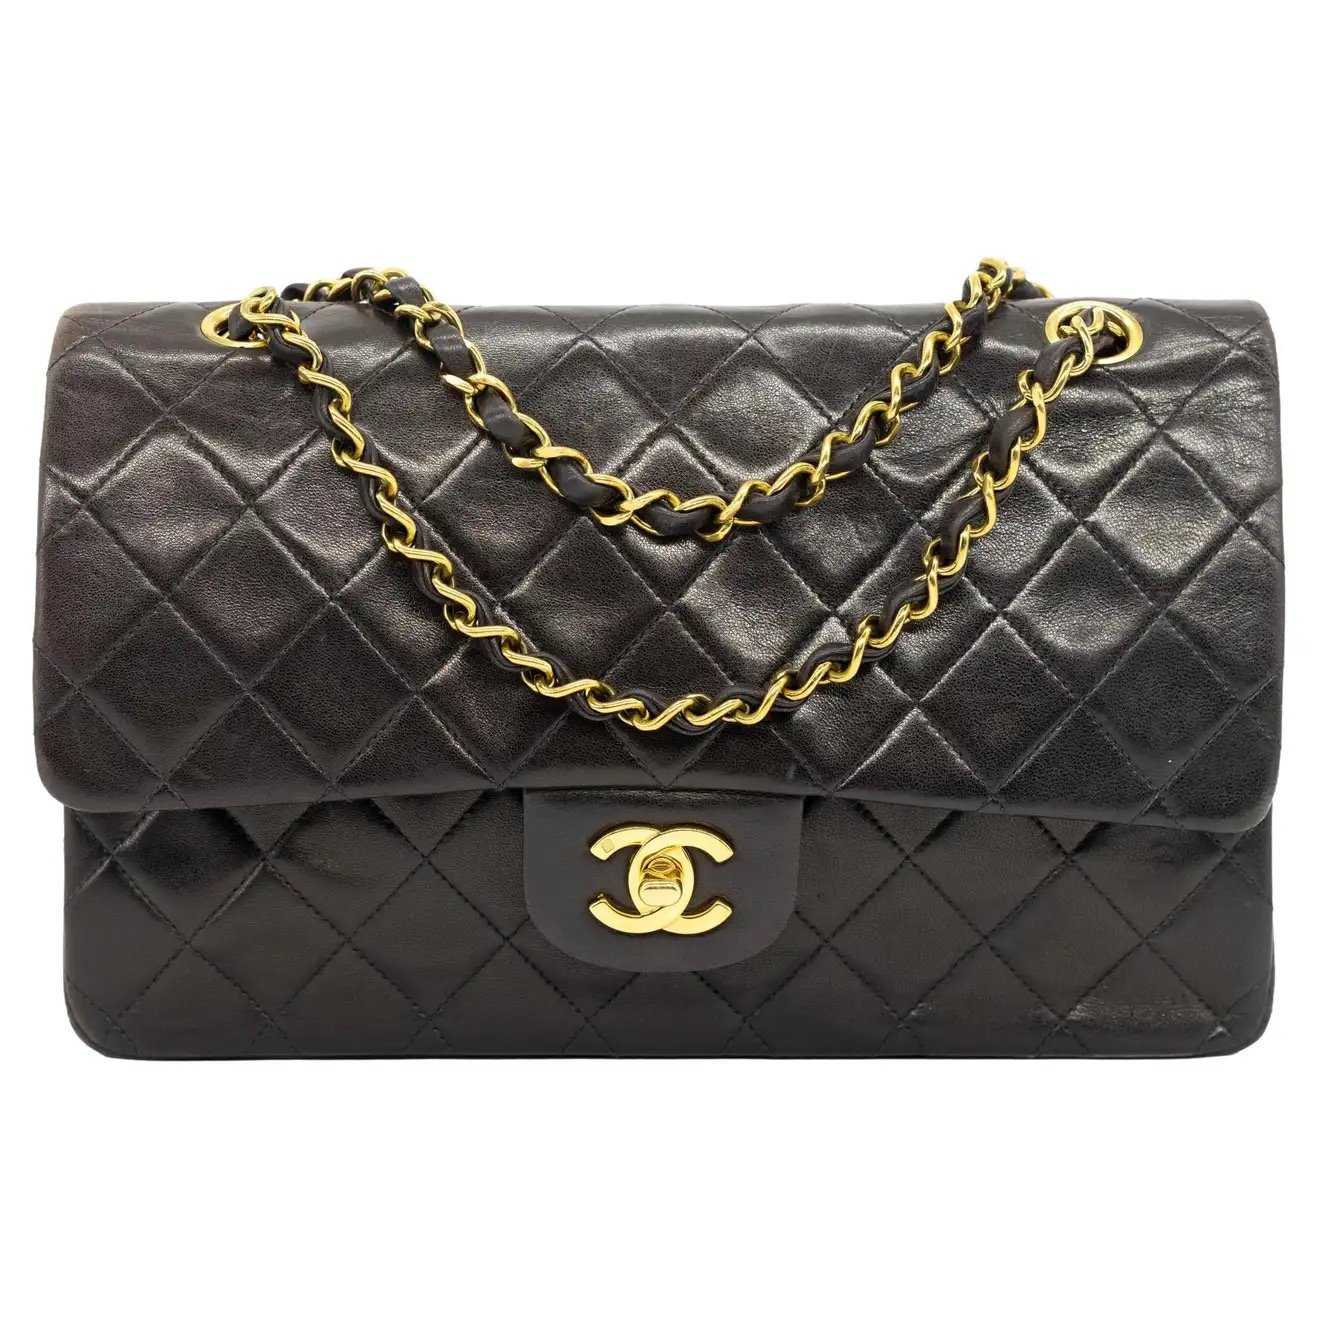 Past auction: Chanel black quilted 2.55 purse 1980s